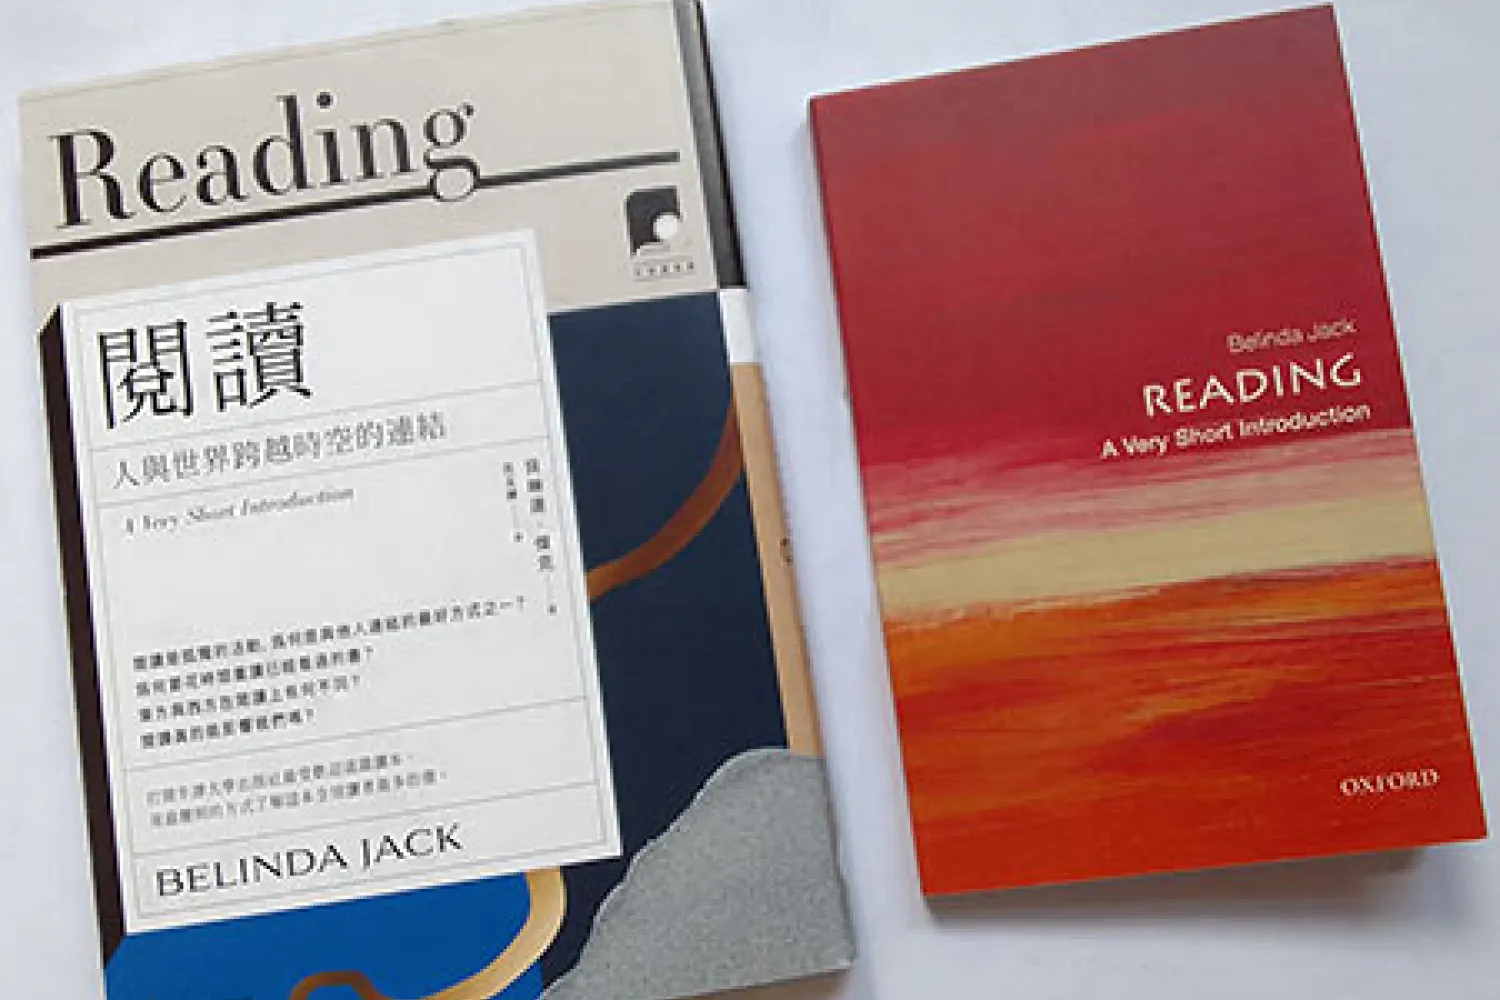 The traditional Chinese edition of Belinda Jack’s Reading